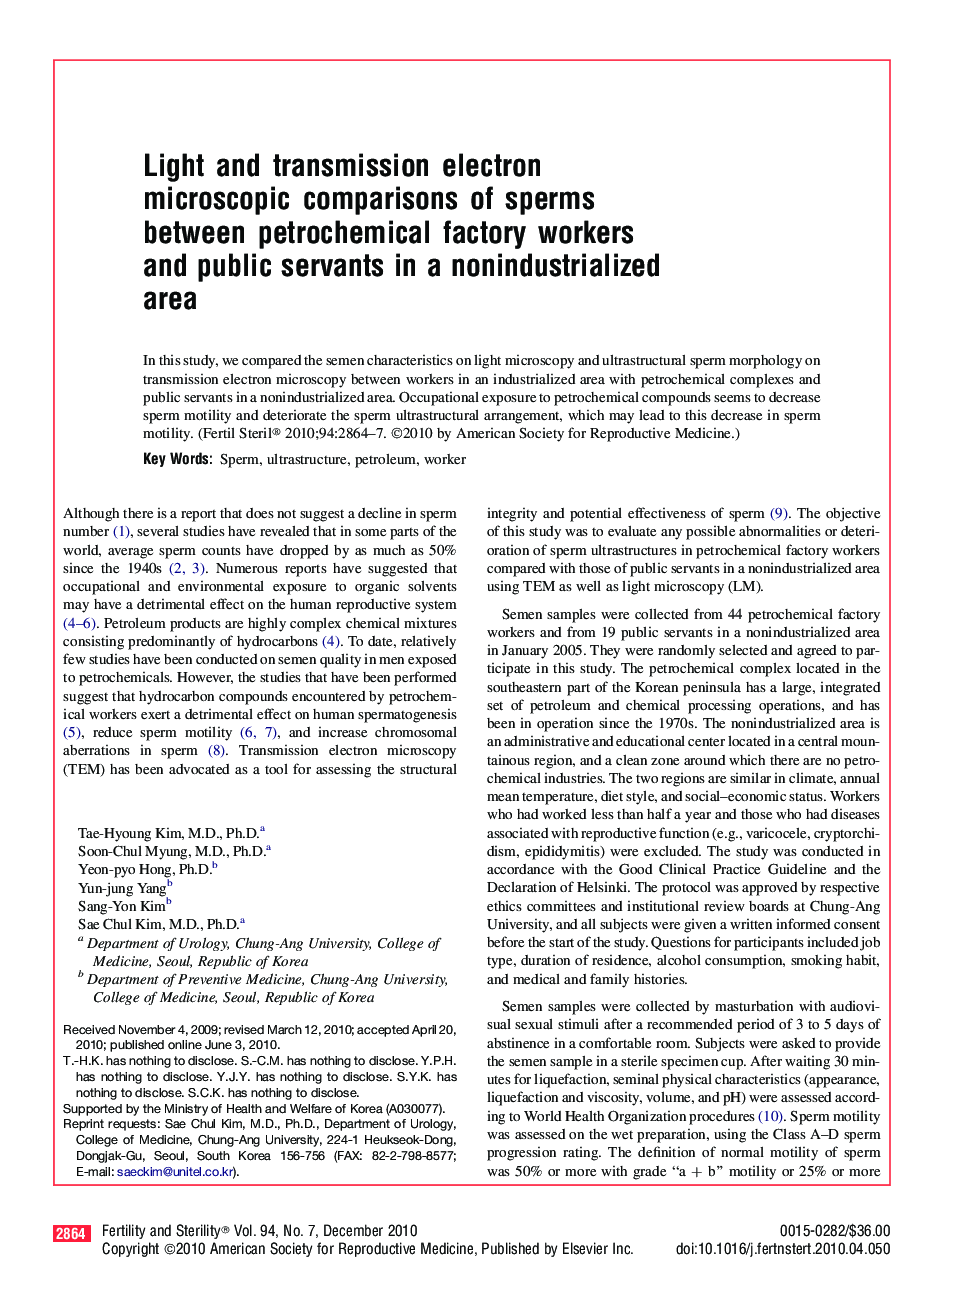 CorrespondenceLight and transmission electron microscopic comparisons of sperms between petrochemical factory workers and public servants in a nonindustrialized area